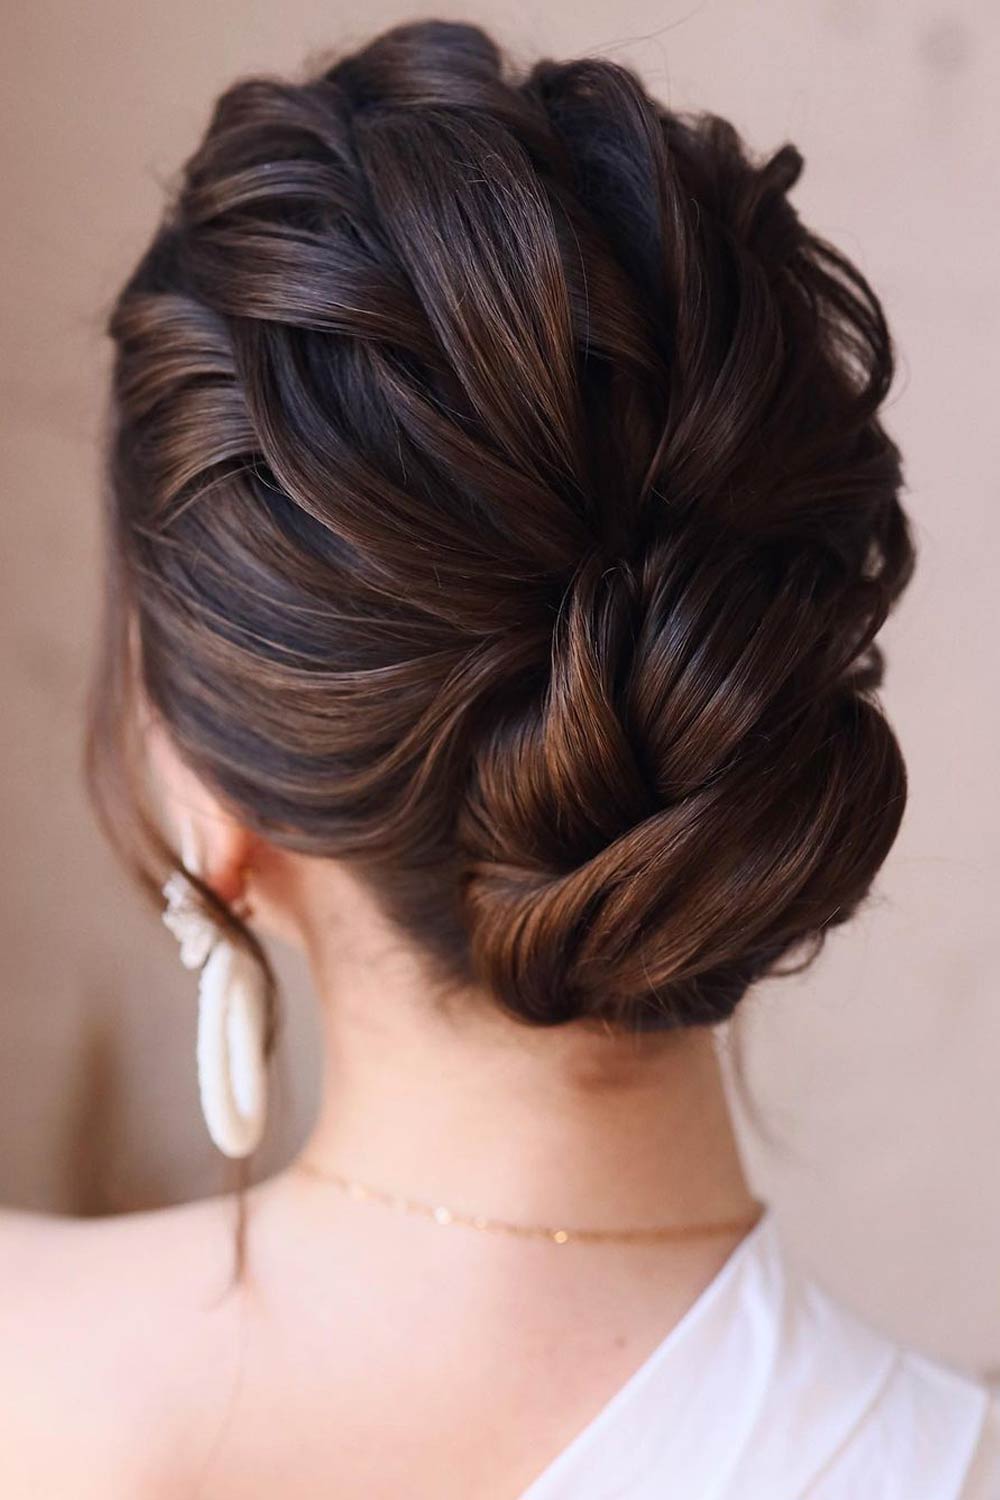 Let Your Hair Updo Be Elegant And Refined At Prom